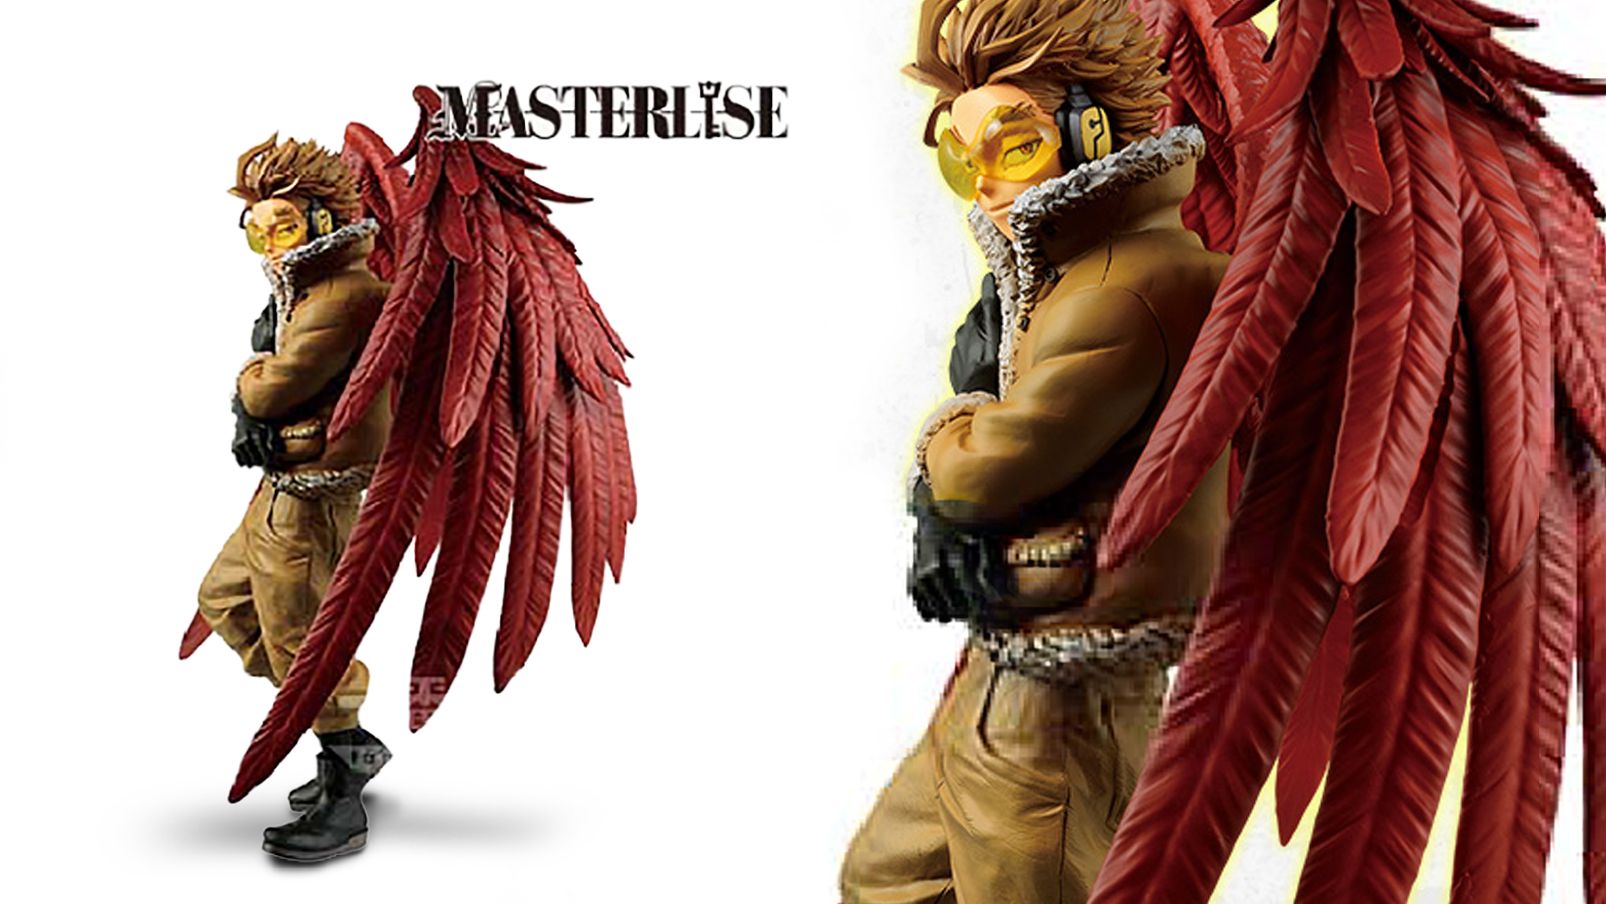 Aitai Kuji There Will Be At Least Two New Official Bokunoheroacademia Hawks Figurines Coming This Year One From The Age Of Heroes Line Of Figurines The Other From A New